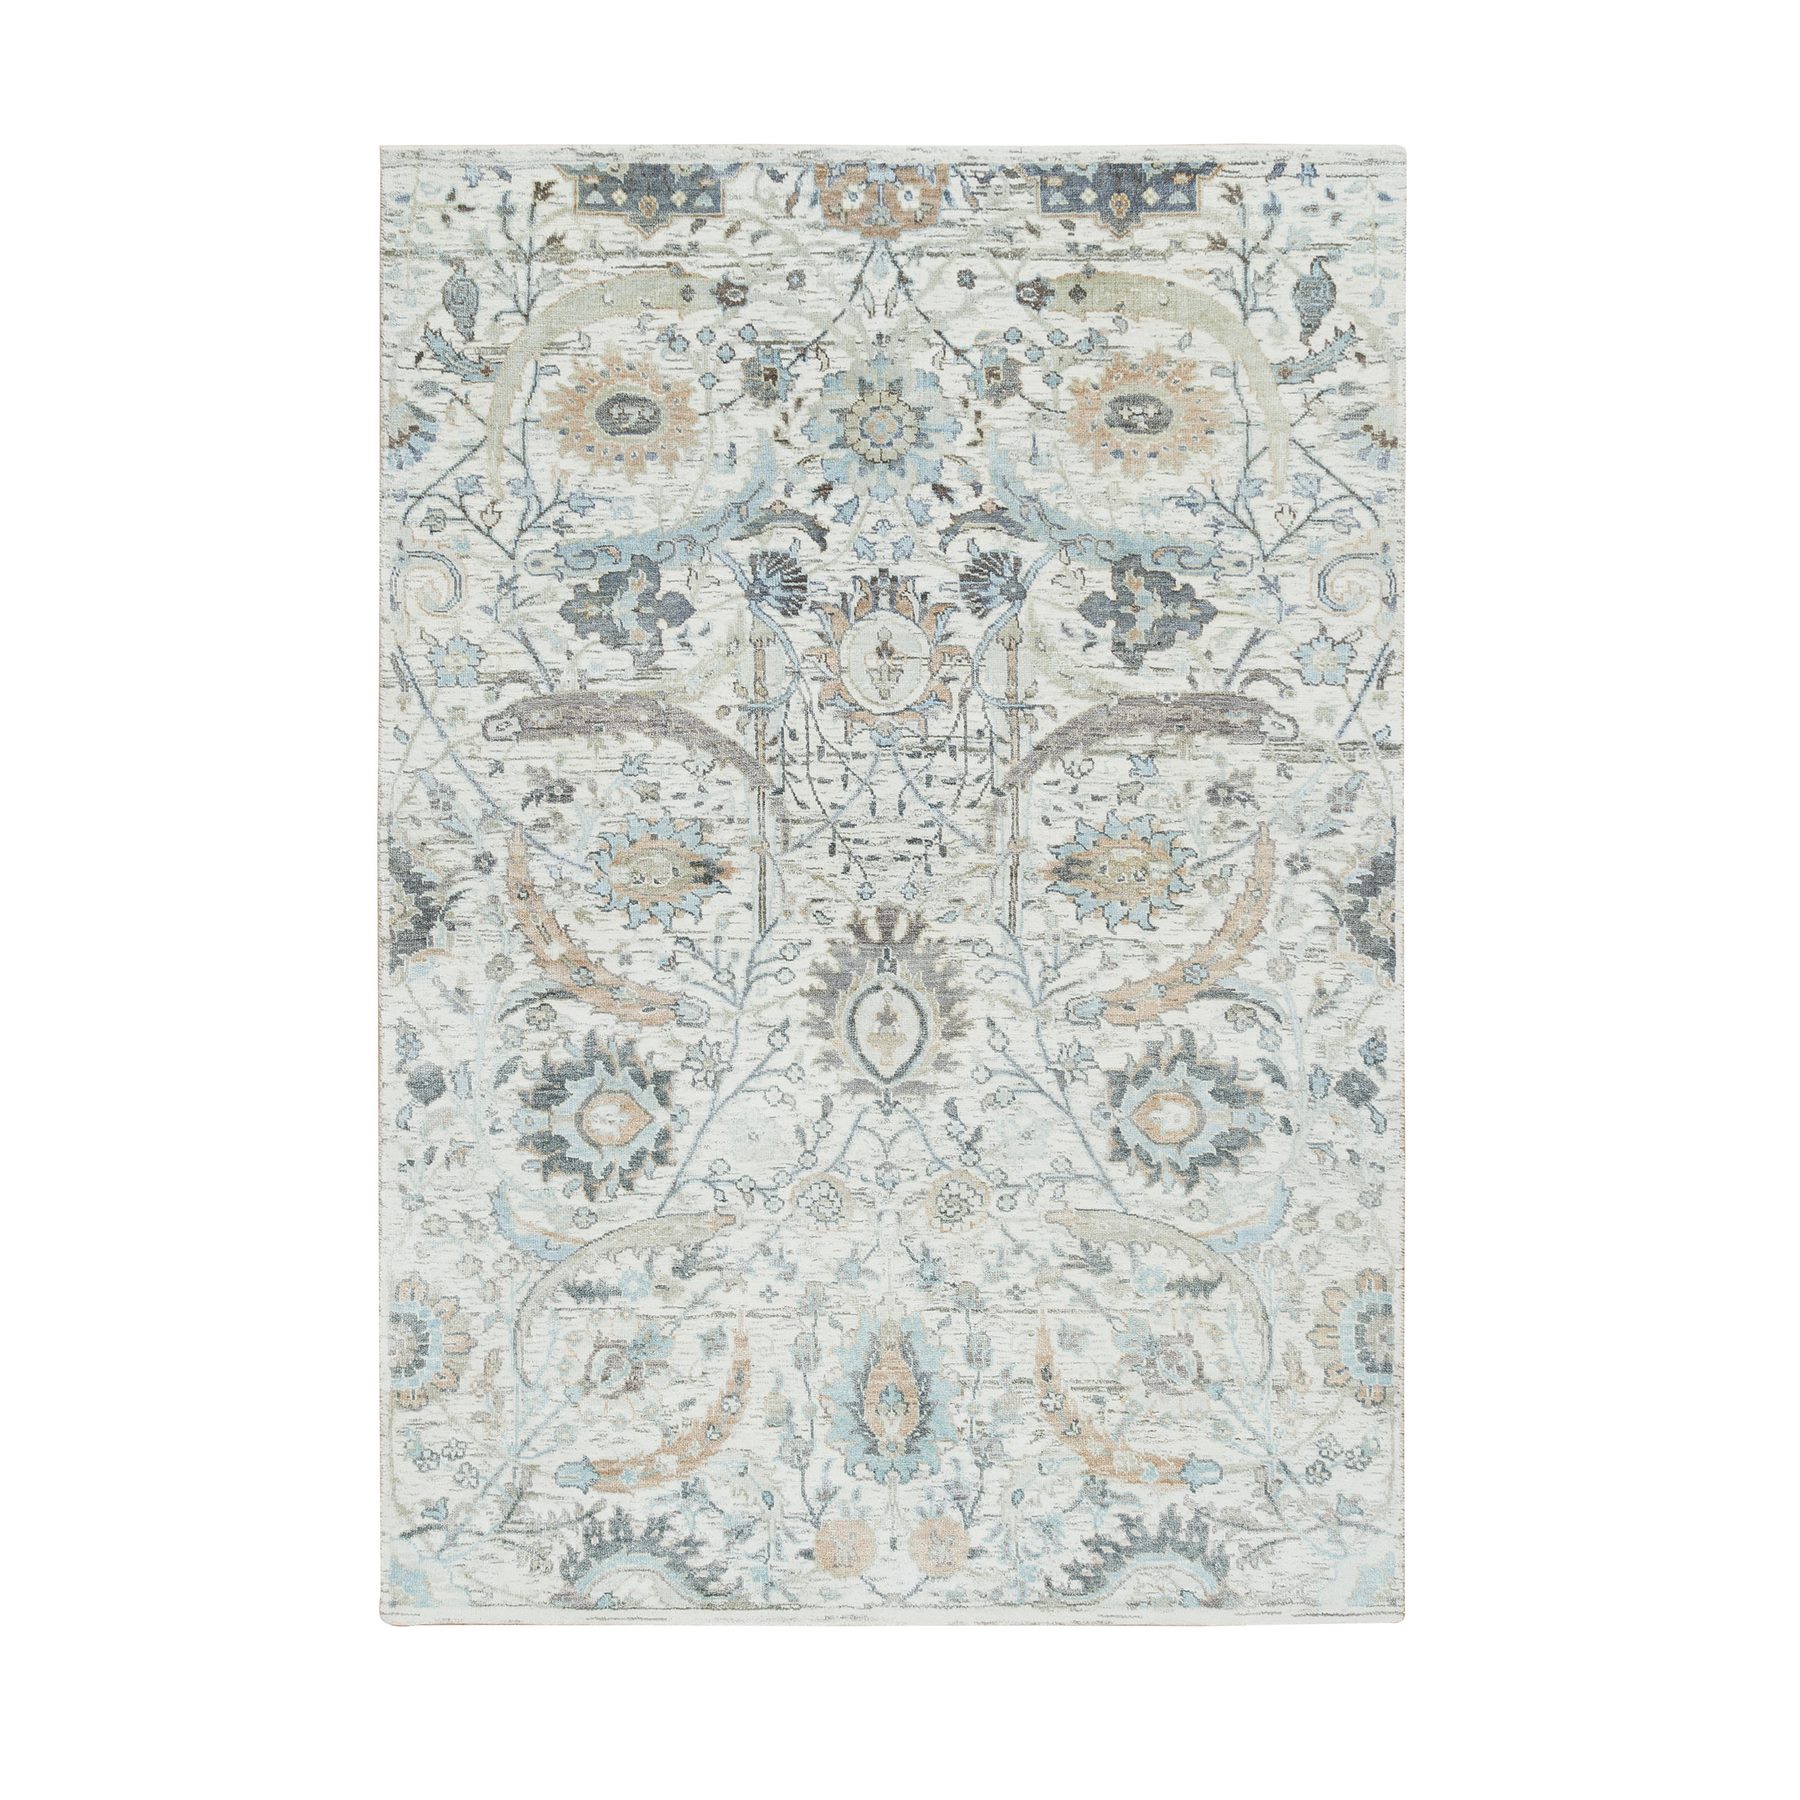  Silk Hand-Knotted Area Rug 4'2